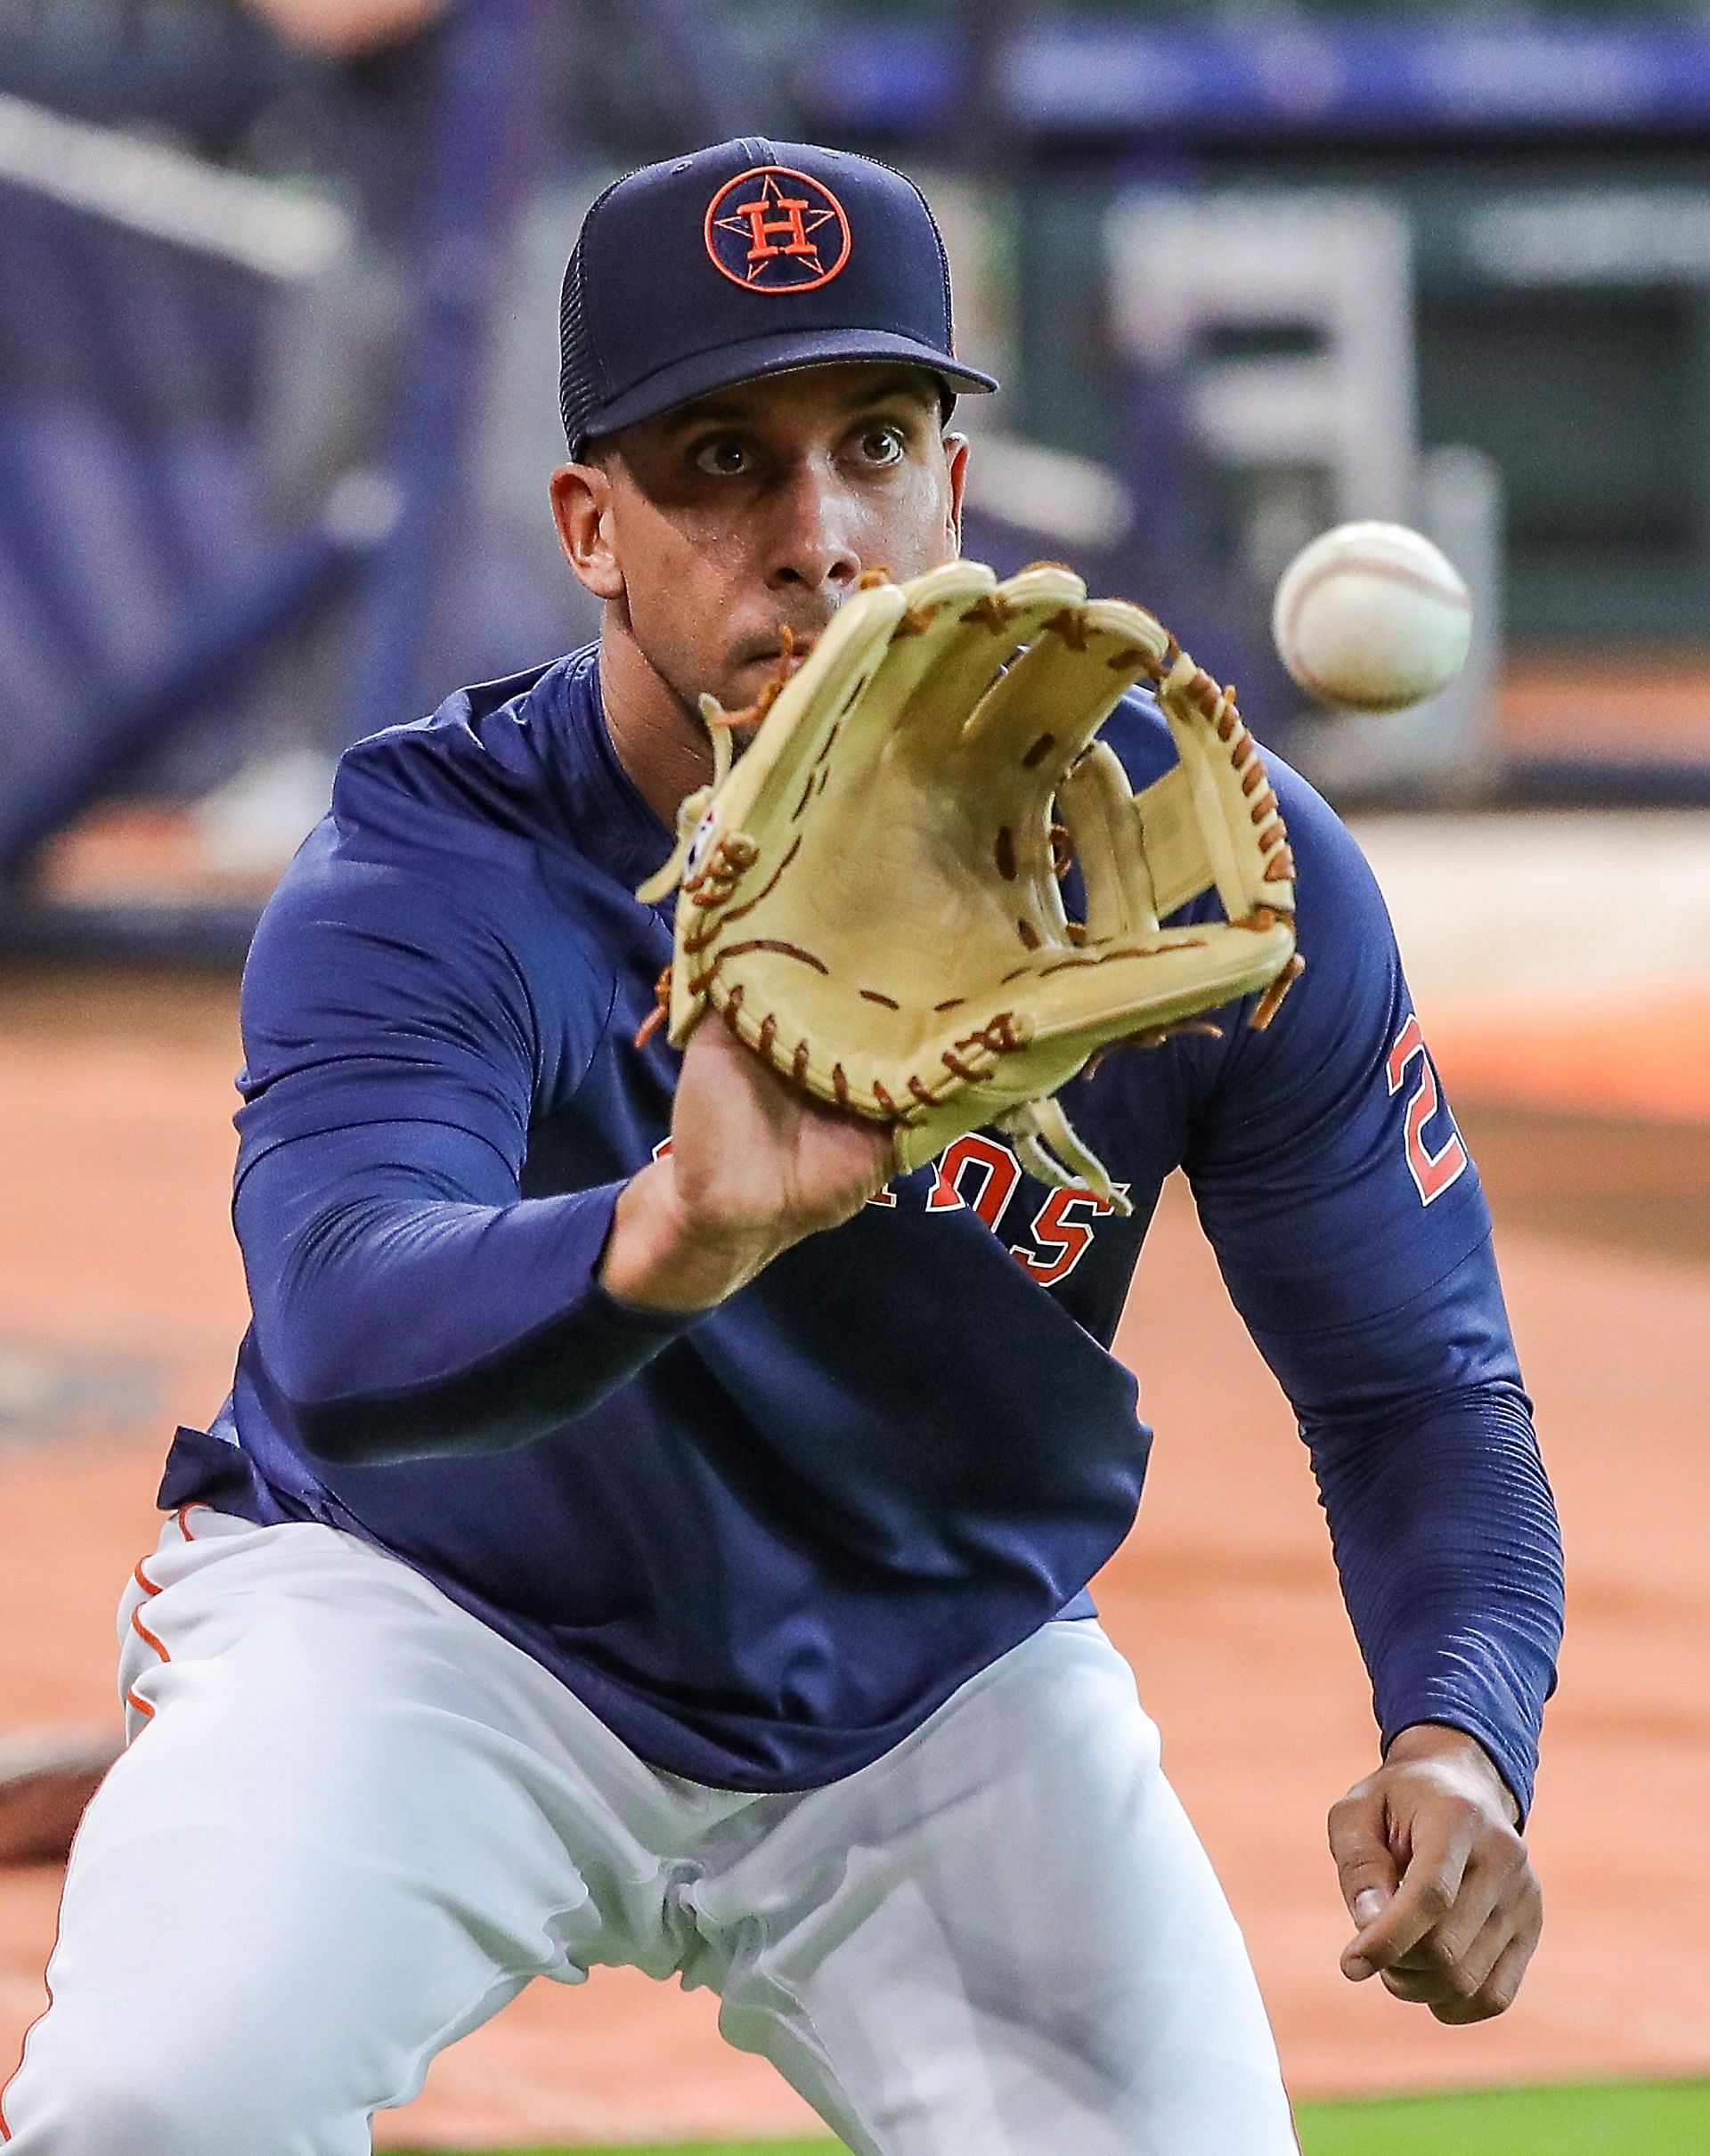 Michael Brantley works out prior to a recent Houston Astros game